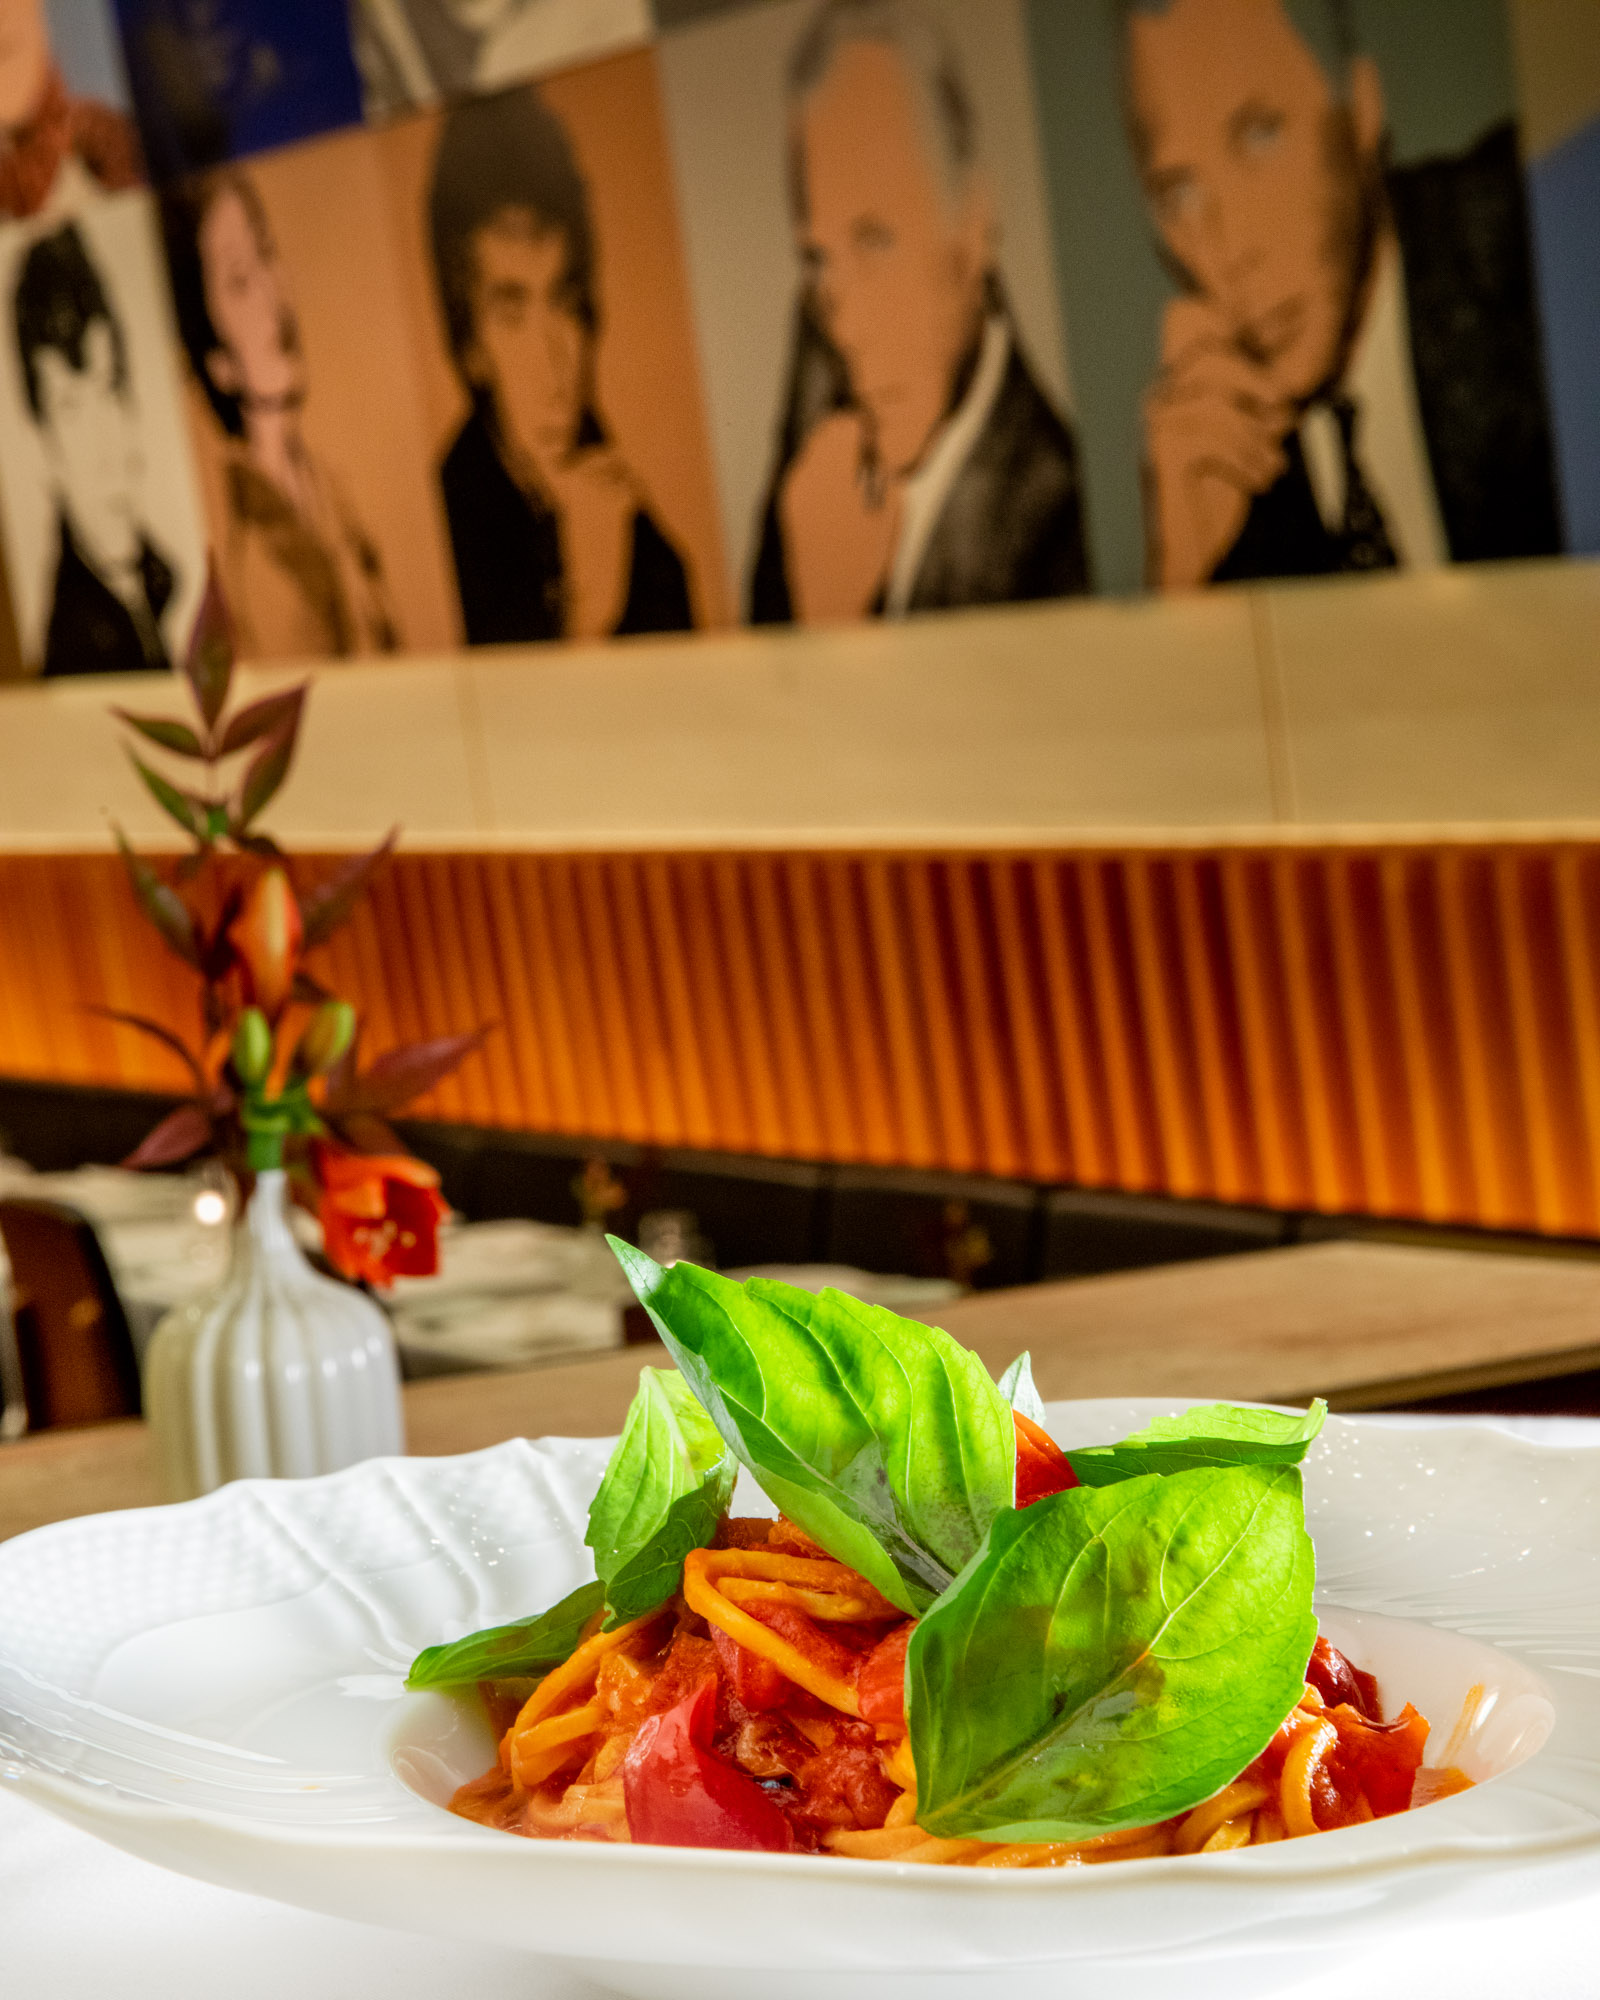 Pasta with a basil garnish photographed in front of Warhol's artwork at Casa Lever in New York City